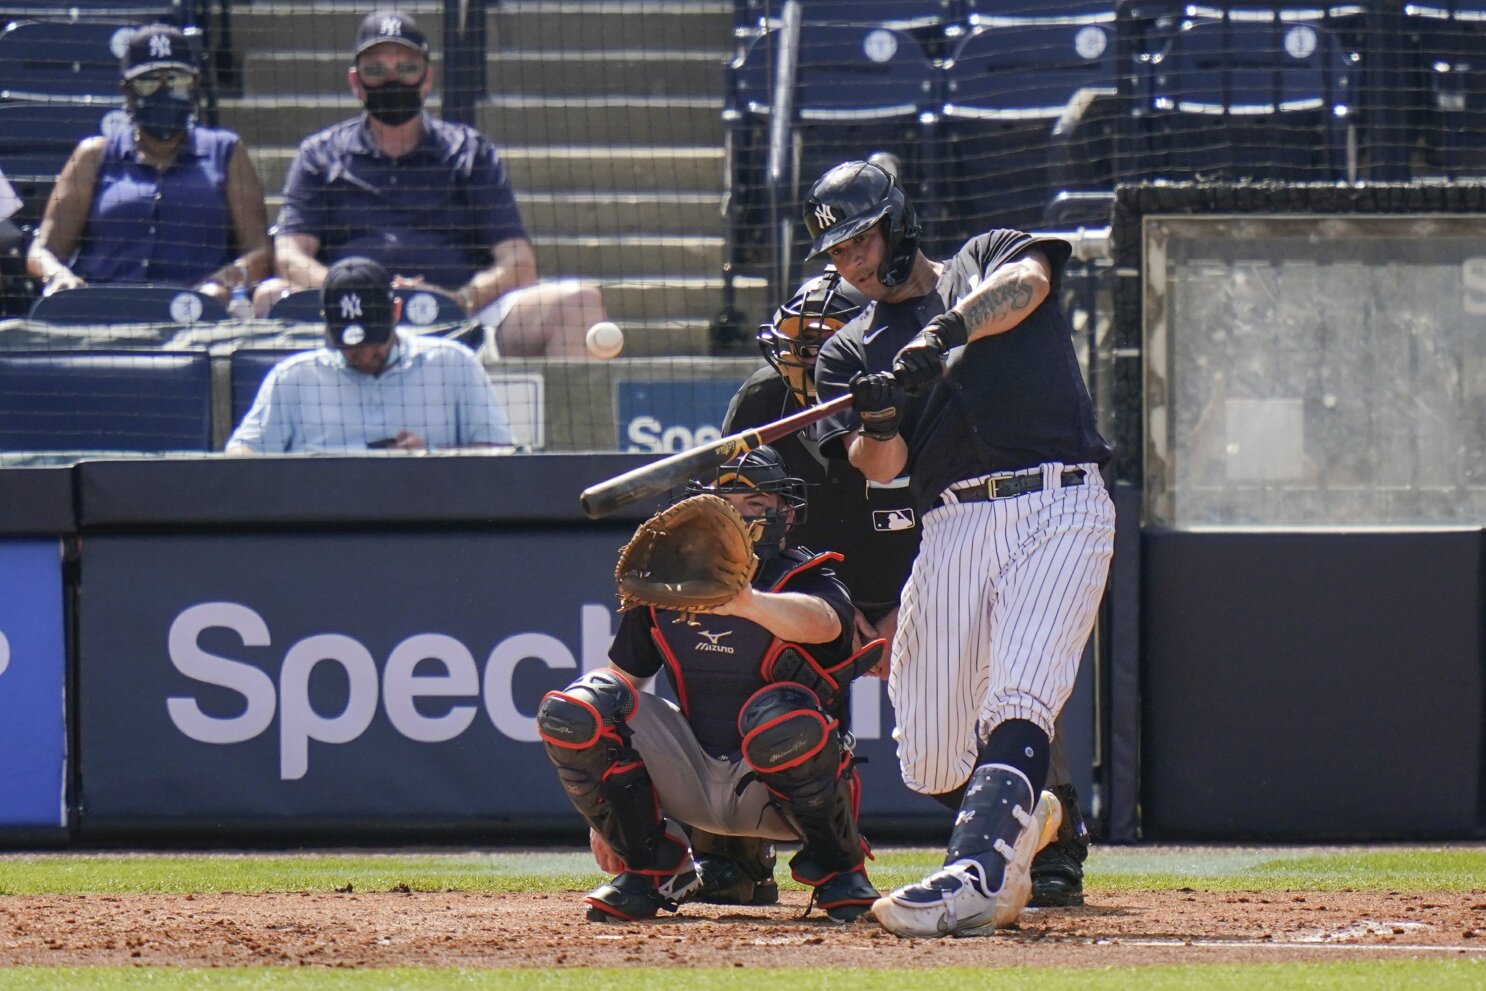 New York Yankees: Brett Gardner continues to grind out plays